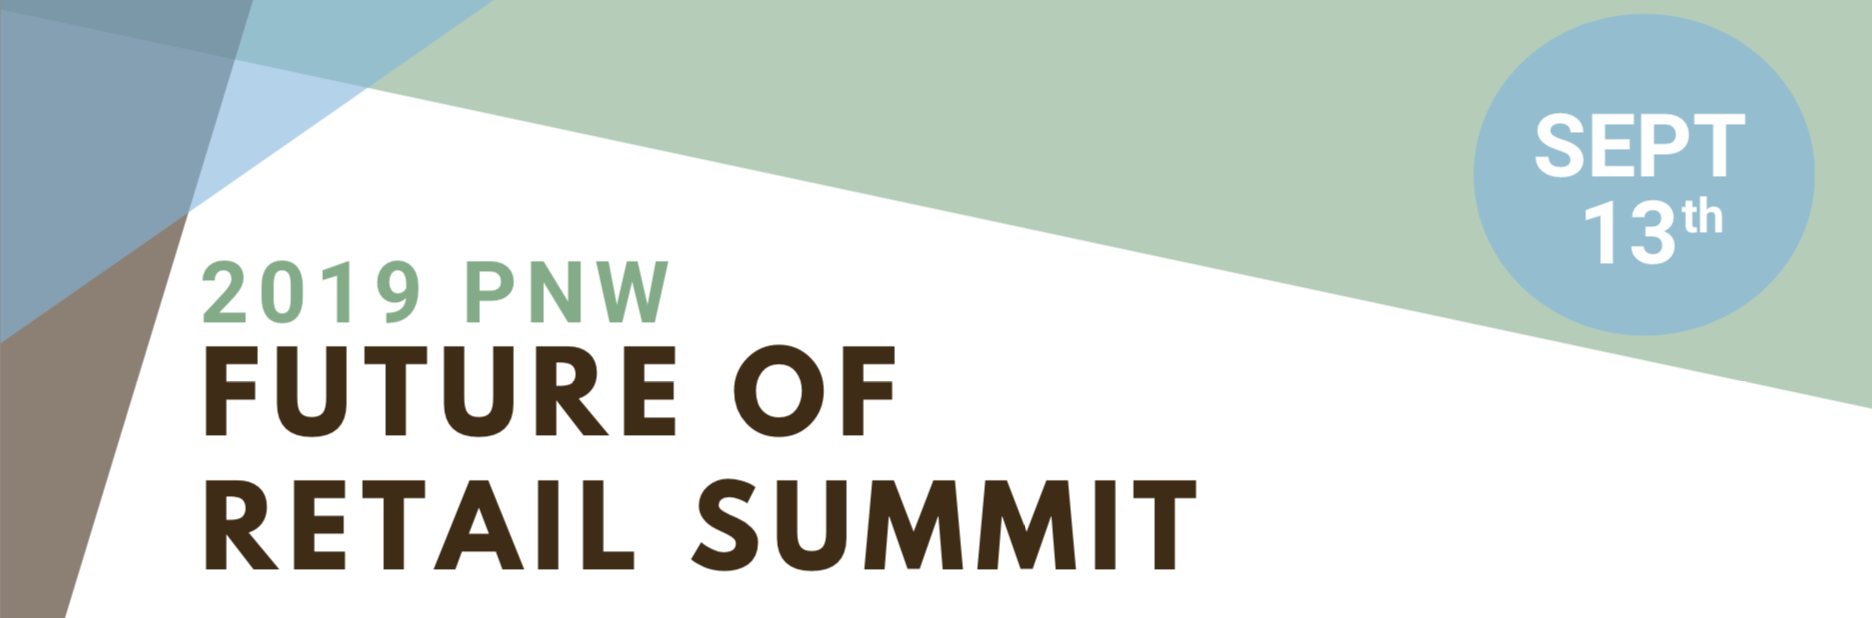 Speakers announced for PNW Future of Retail Summit on Fri., Sept. 13